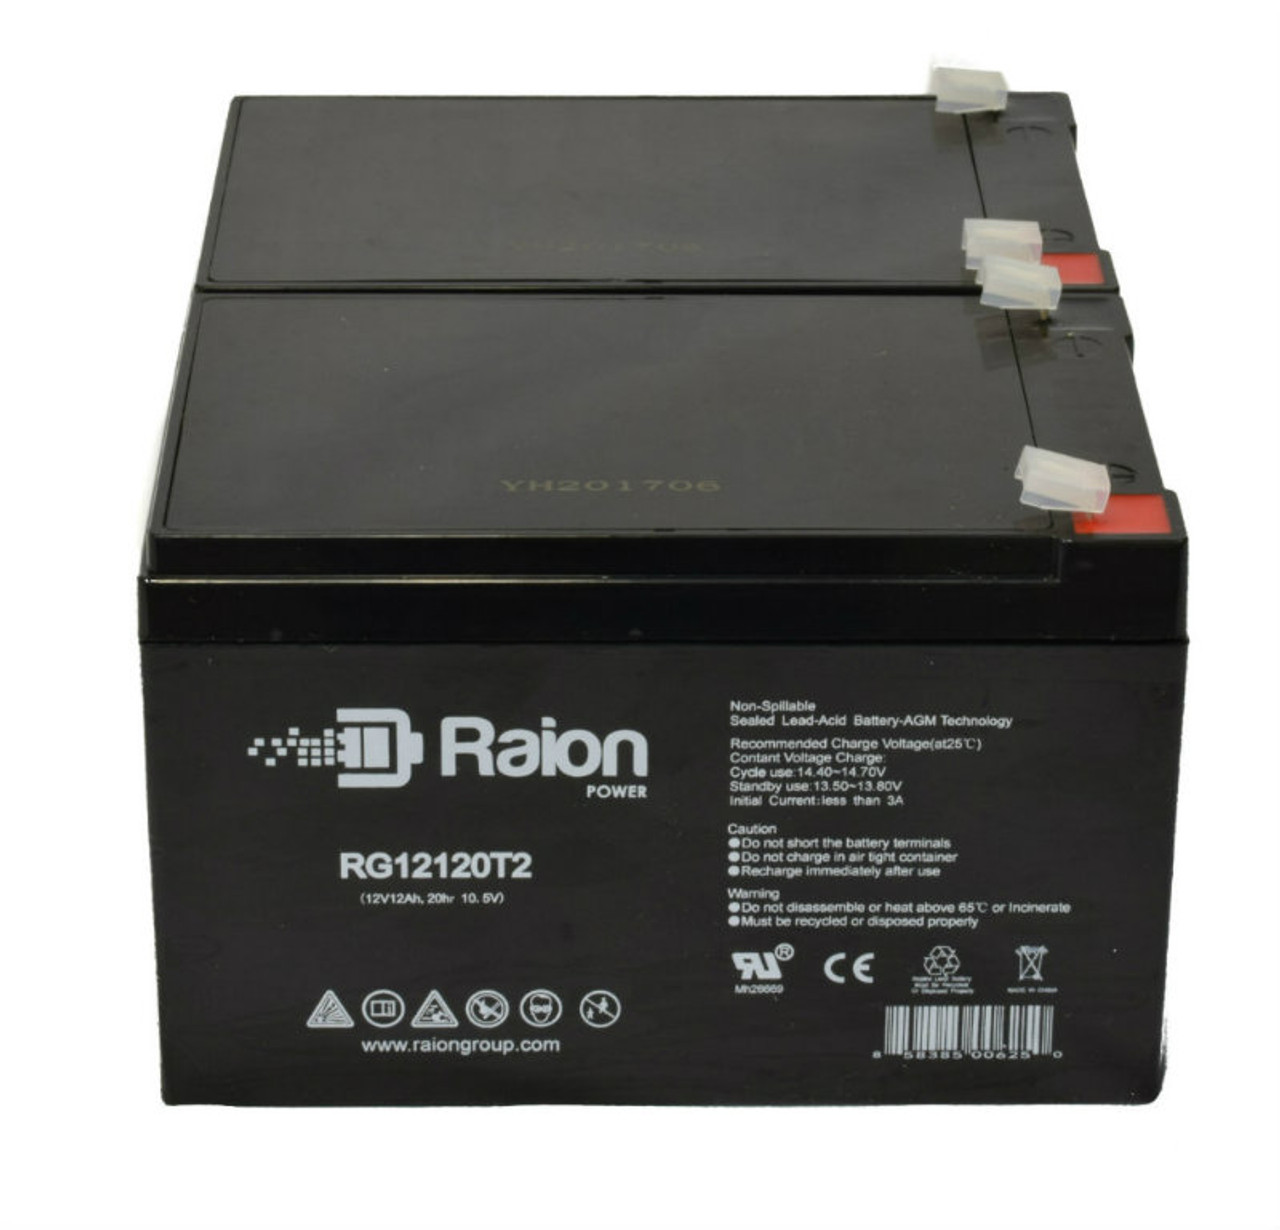 Raion Power 12V 12Ah Non-Spillable Compatible Replacement Battery for Gaston GT12-12C - (2 Pack)